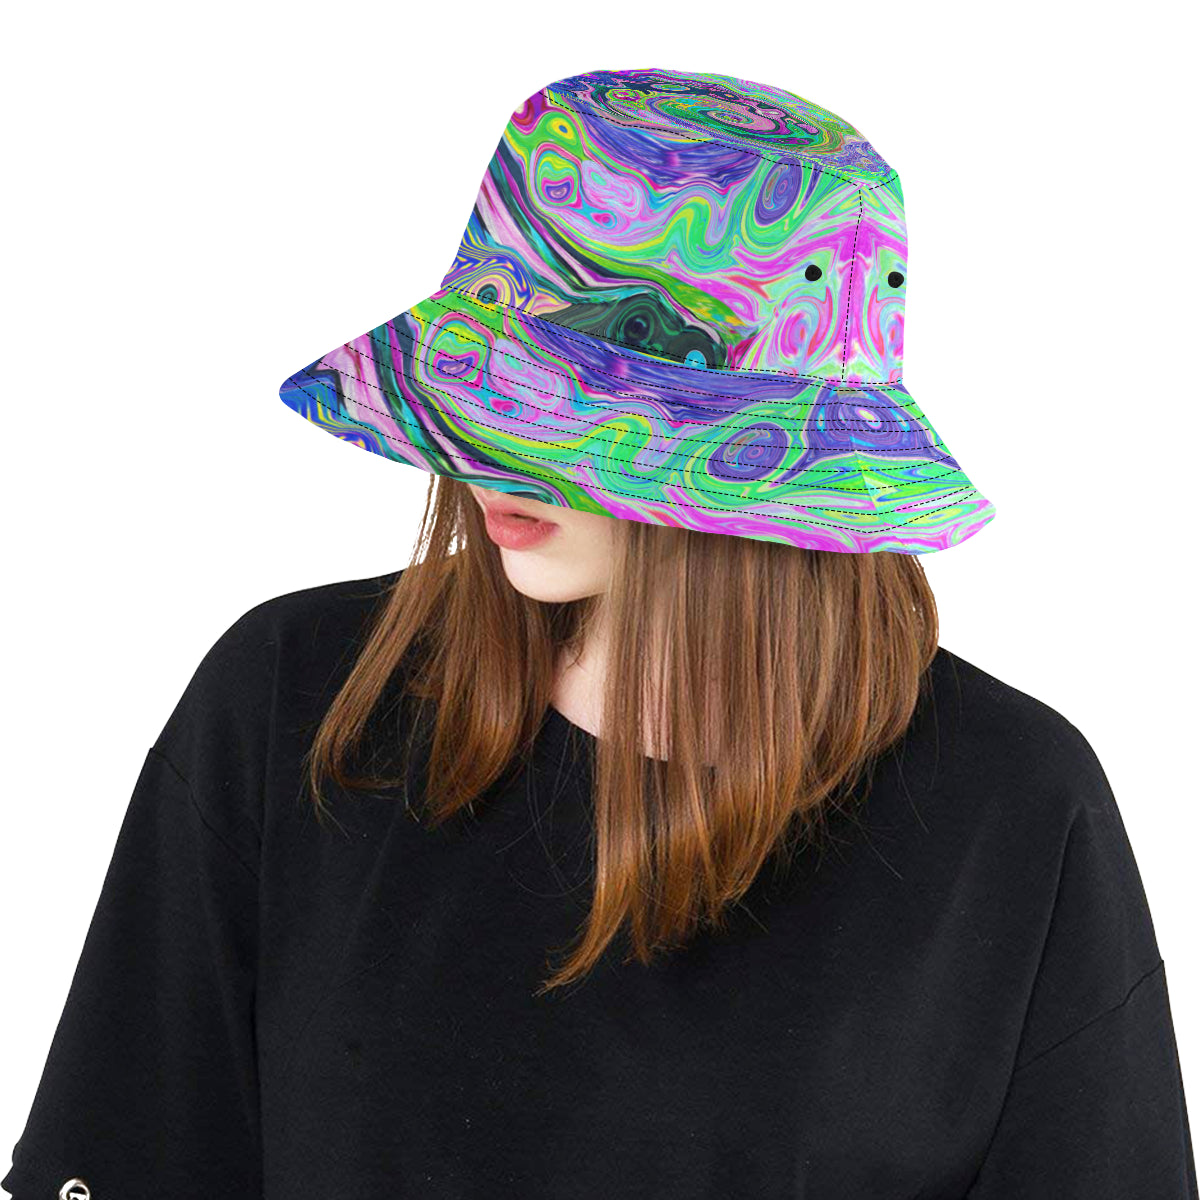 Bucket Hat, Groovy Abstract Aqua and Navy Lava Swirl, Colorful Hat for Women